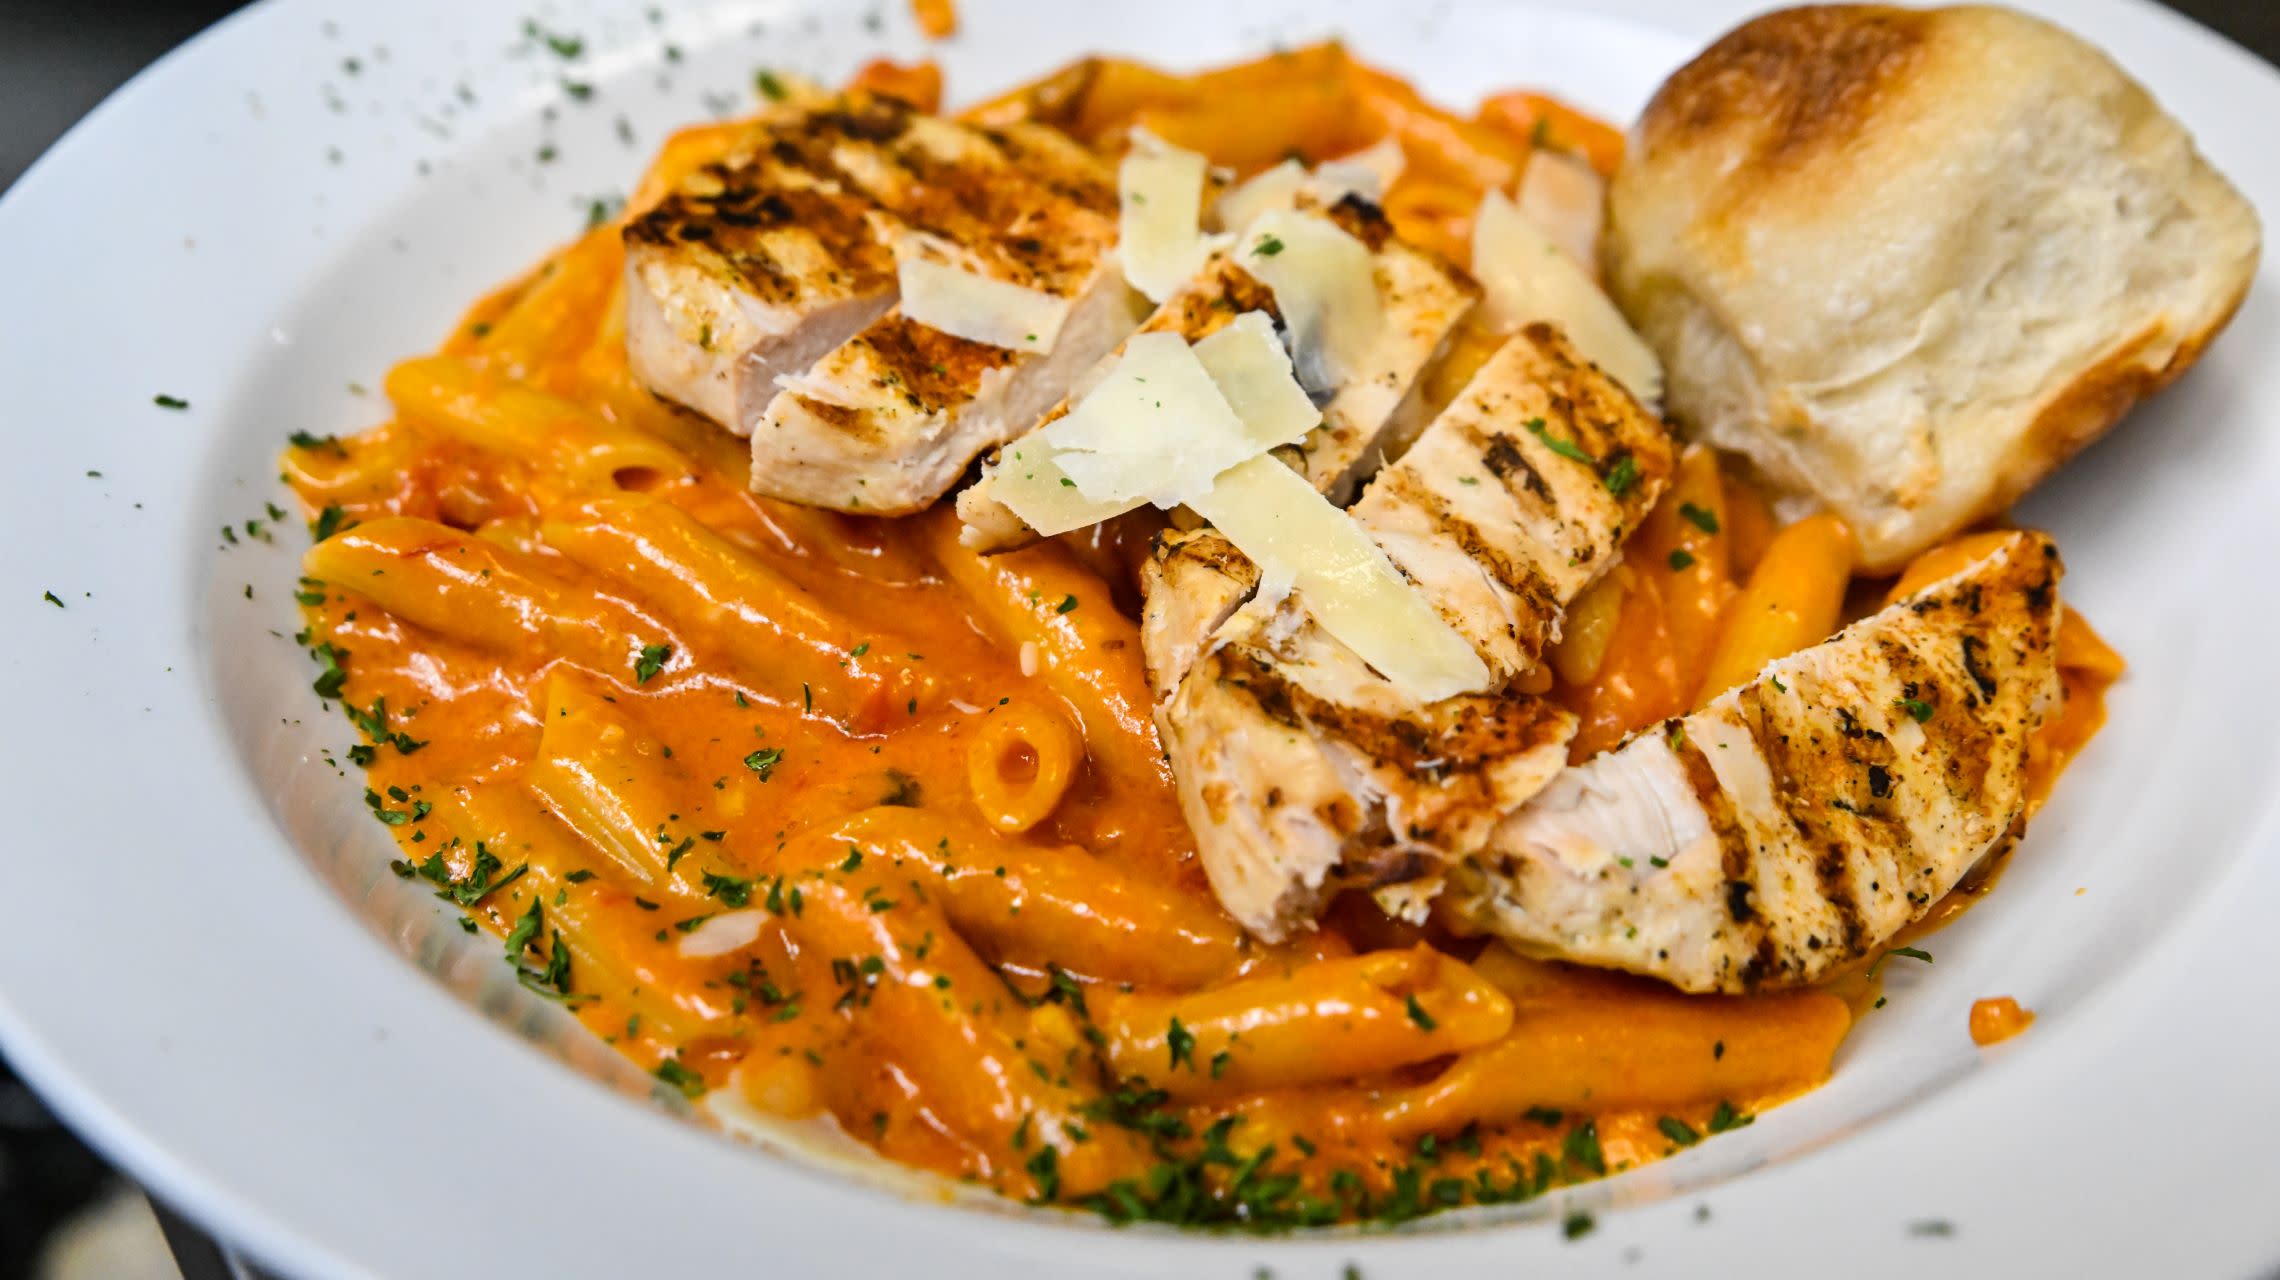 plate of pasta with bread